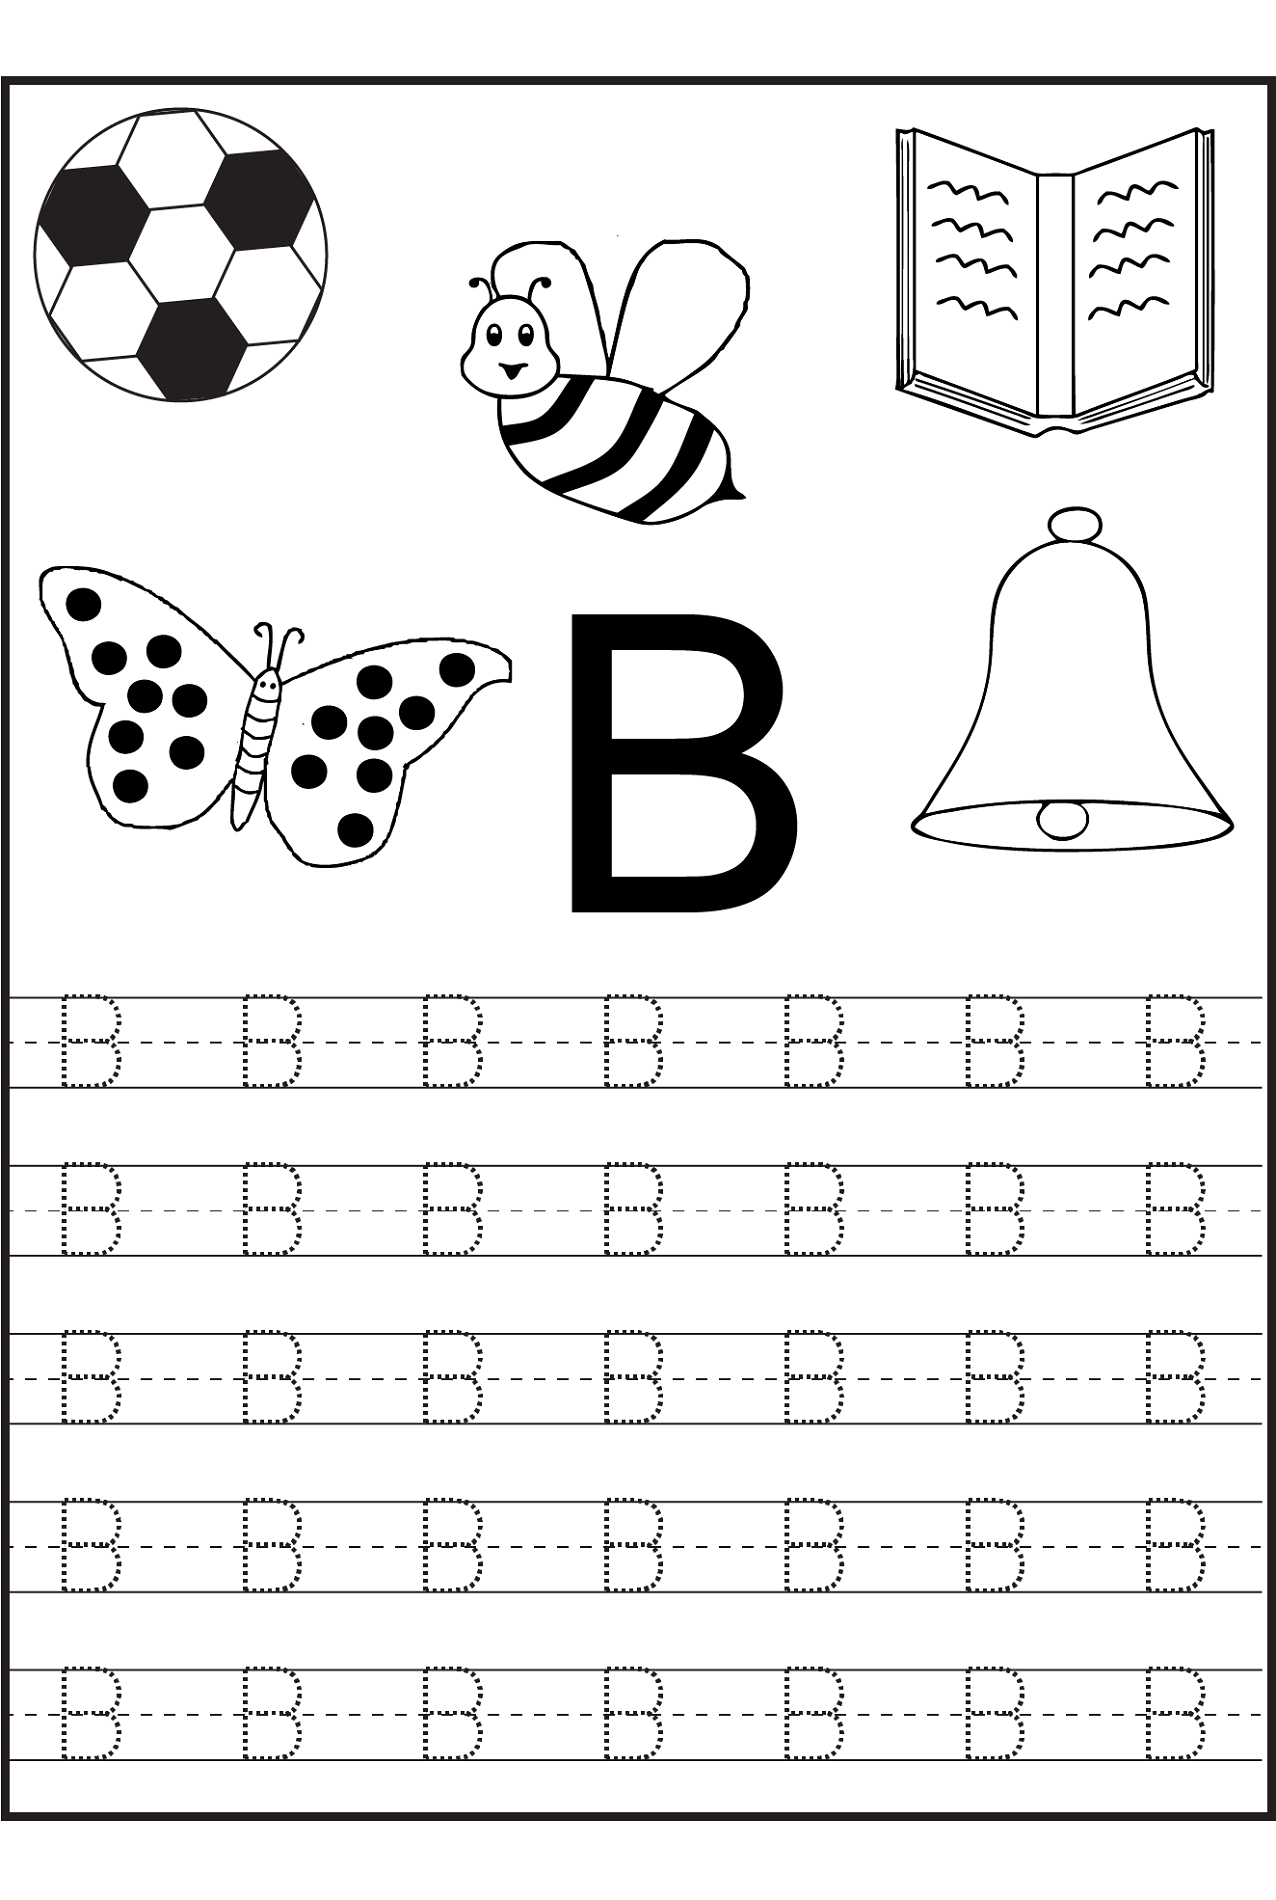 Trace Letter B Worksheets | Activity Shelter pertaining to Letter B Tracing Printable